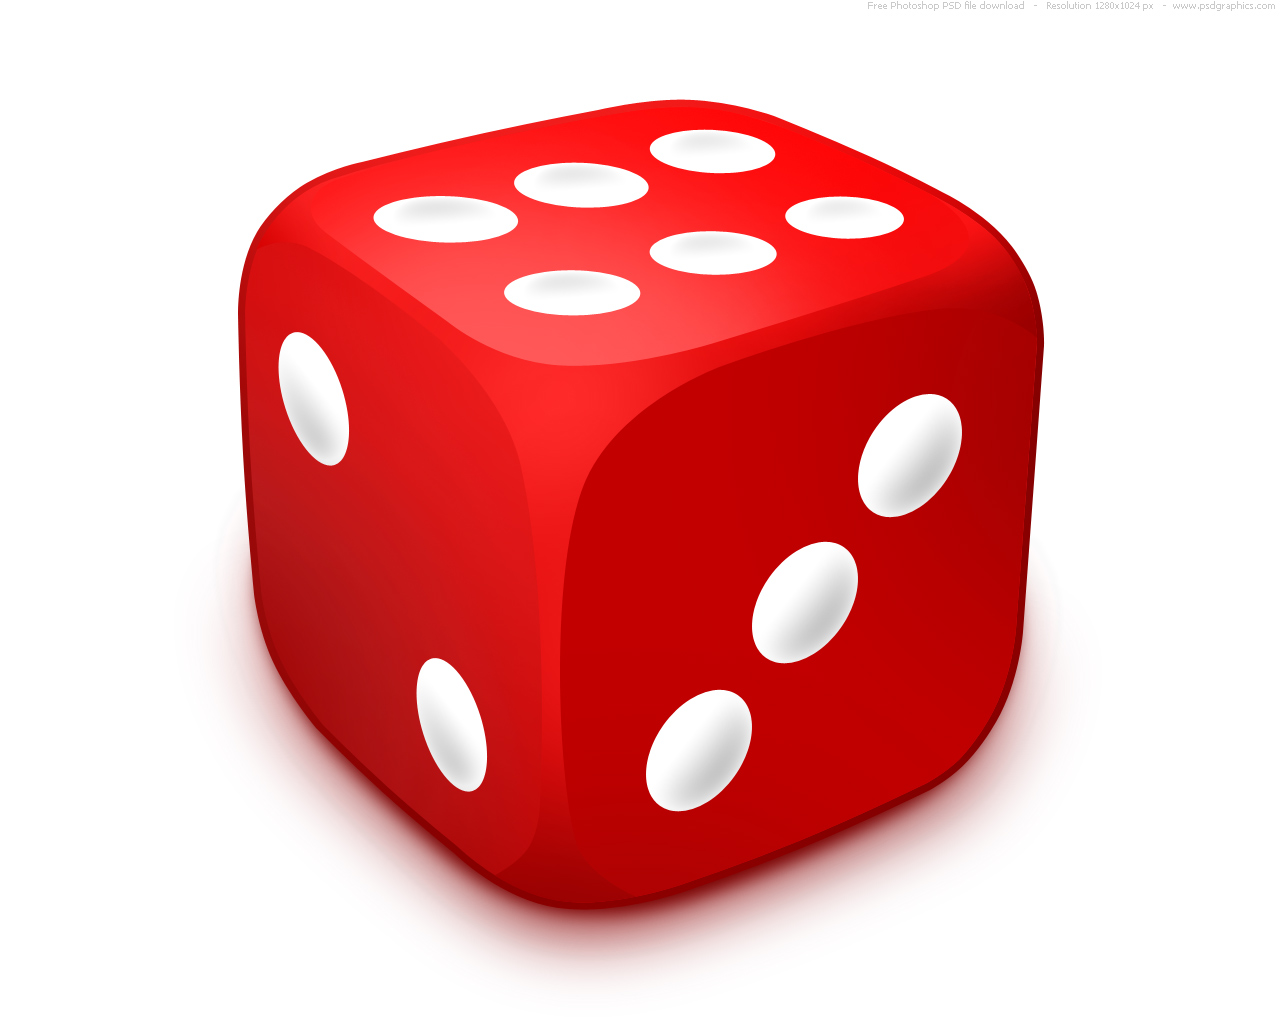 Rolling Dice   Clipart Panda   Free Clipart Images